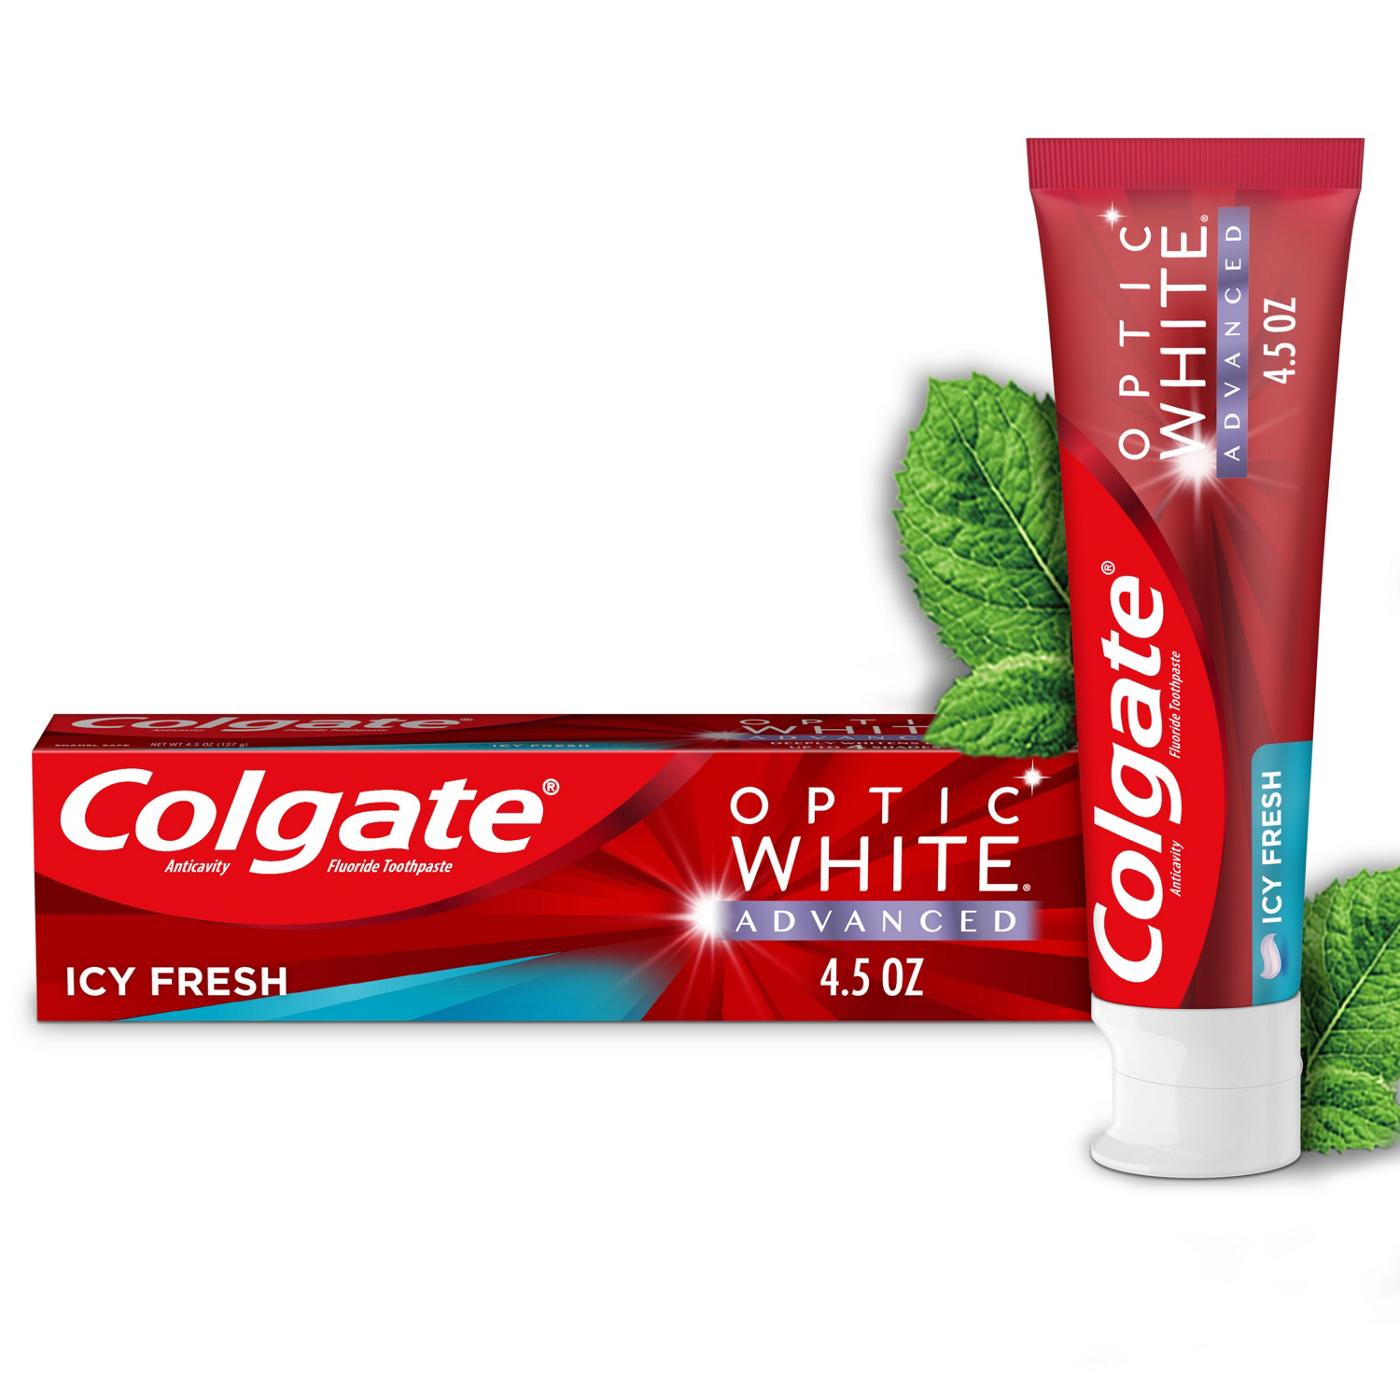 Colgate Optic White Advanced Anticavity Toothpaste - Icy Fresh; image 7 of 8